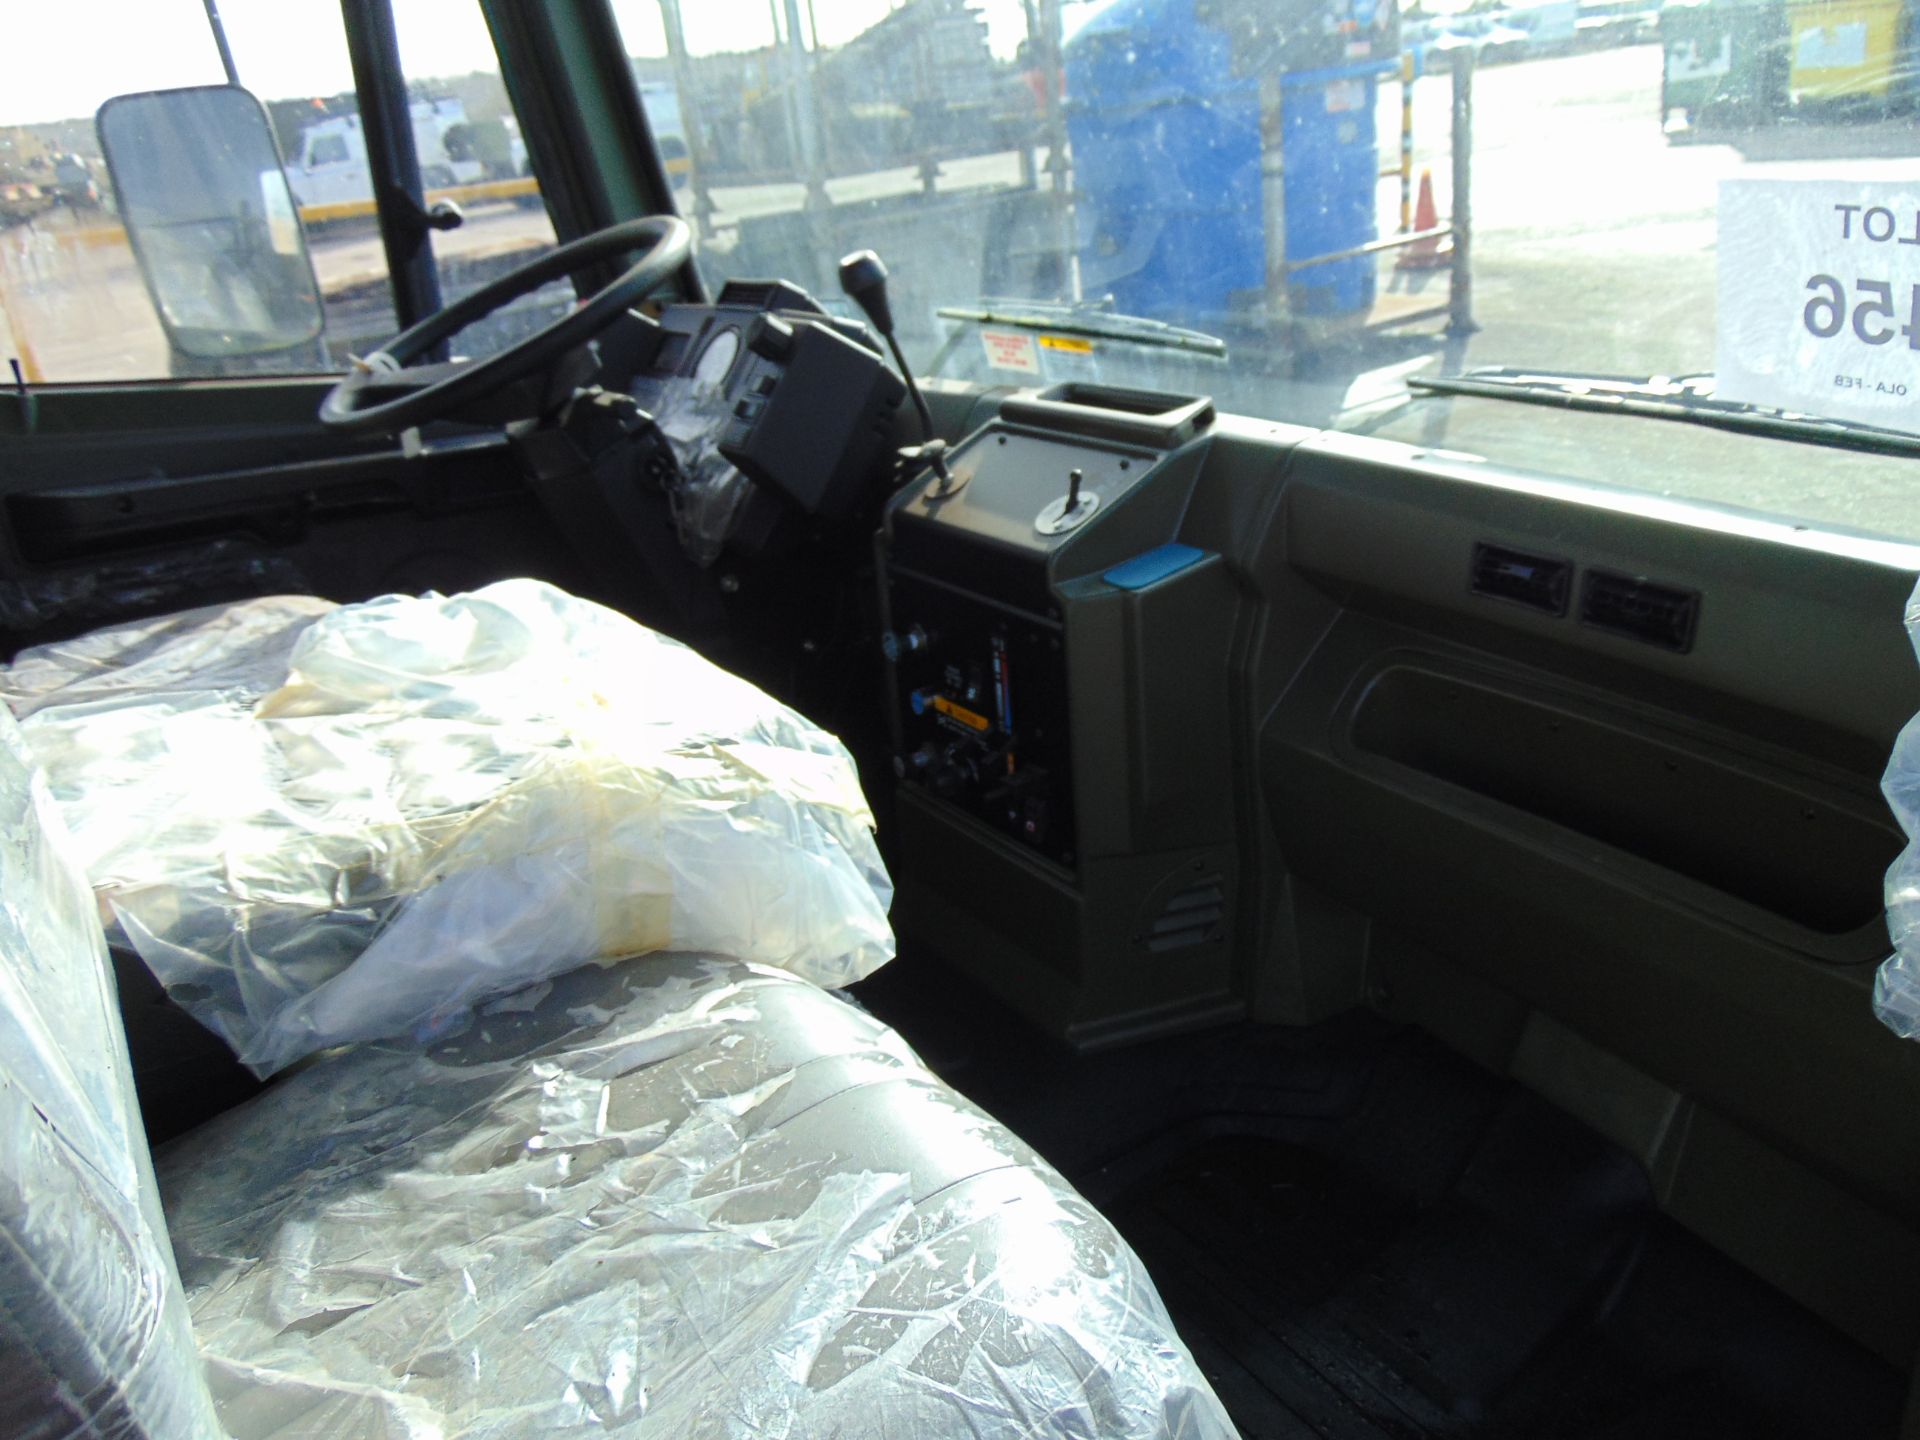 1 x New Unissued Replacement Cab for Leyland Daf 4 tonne fully dressed as shown - Image 8 of 11